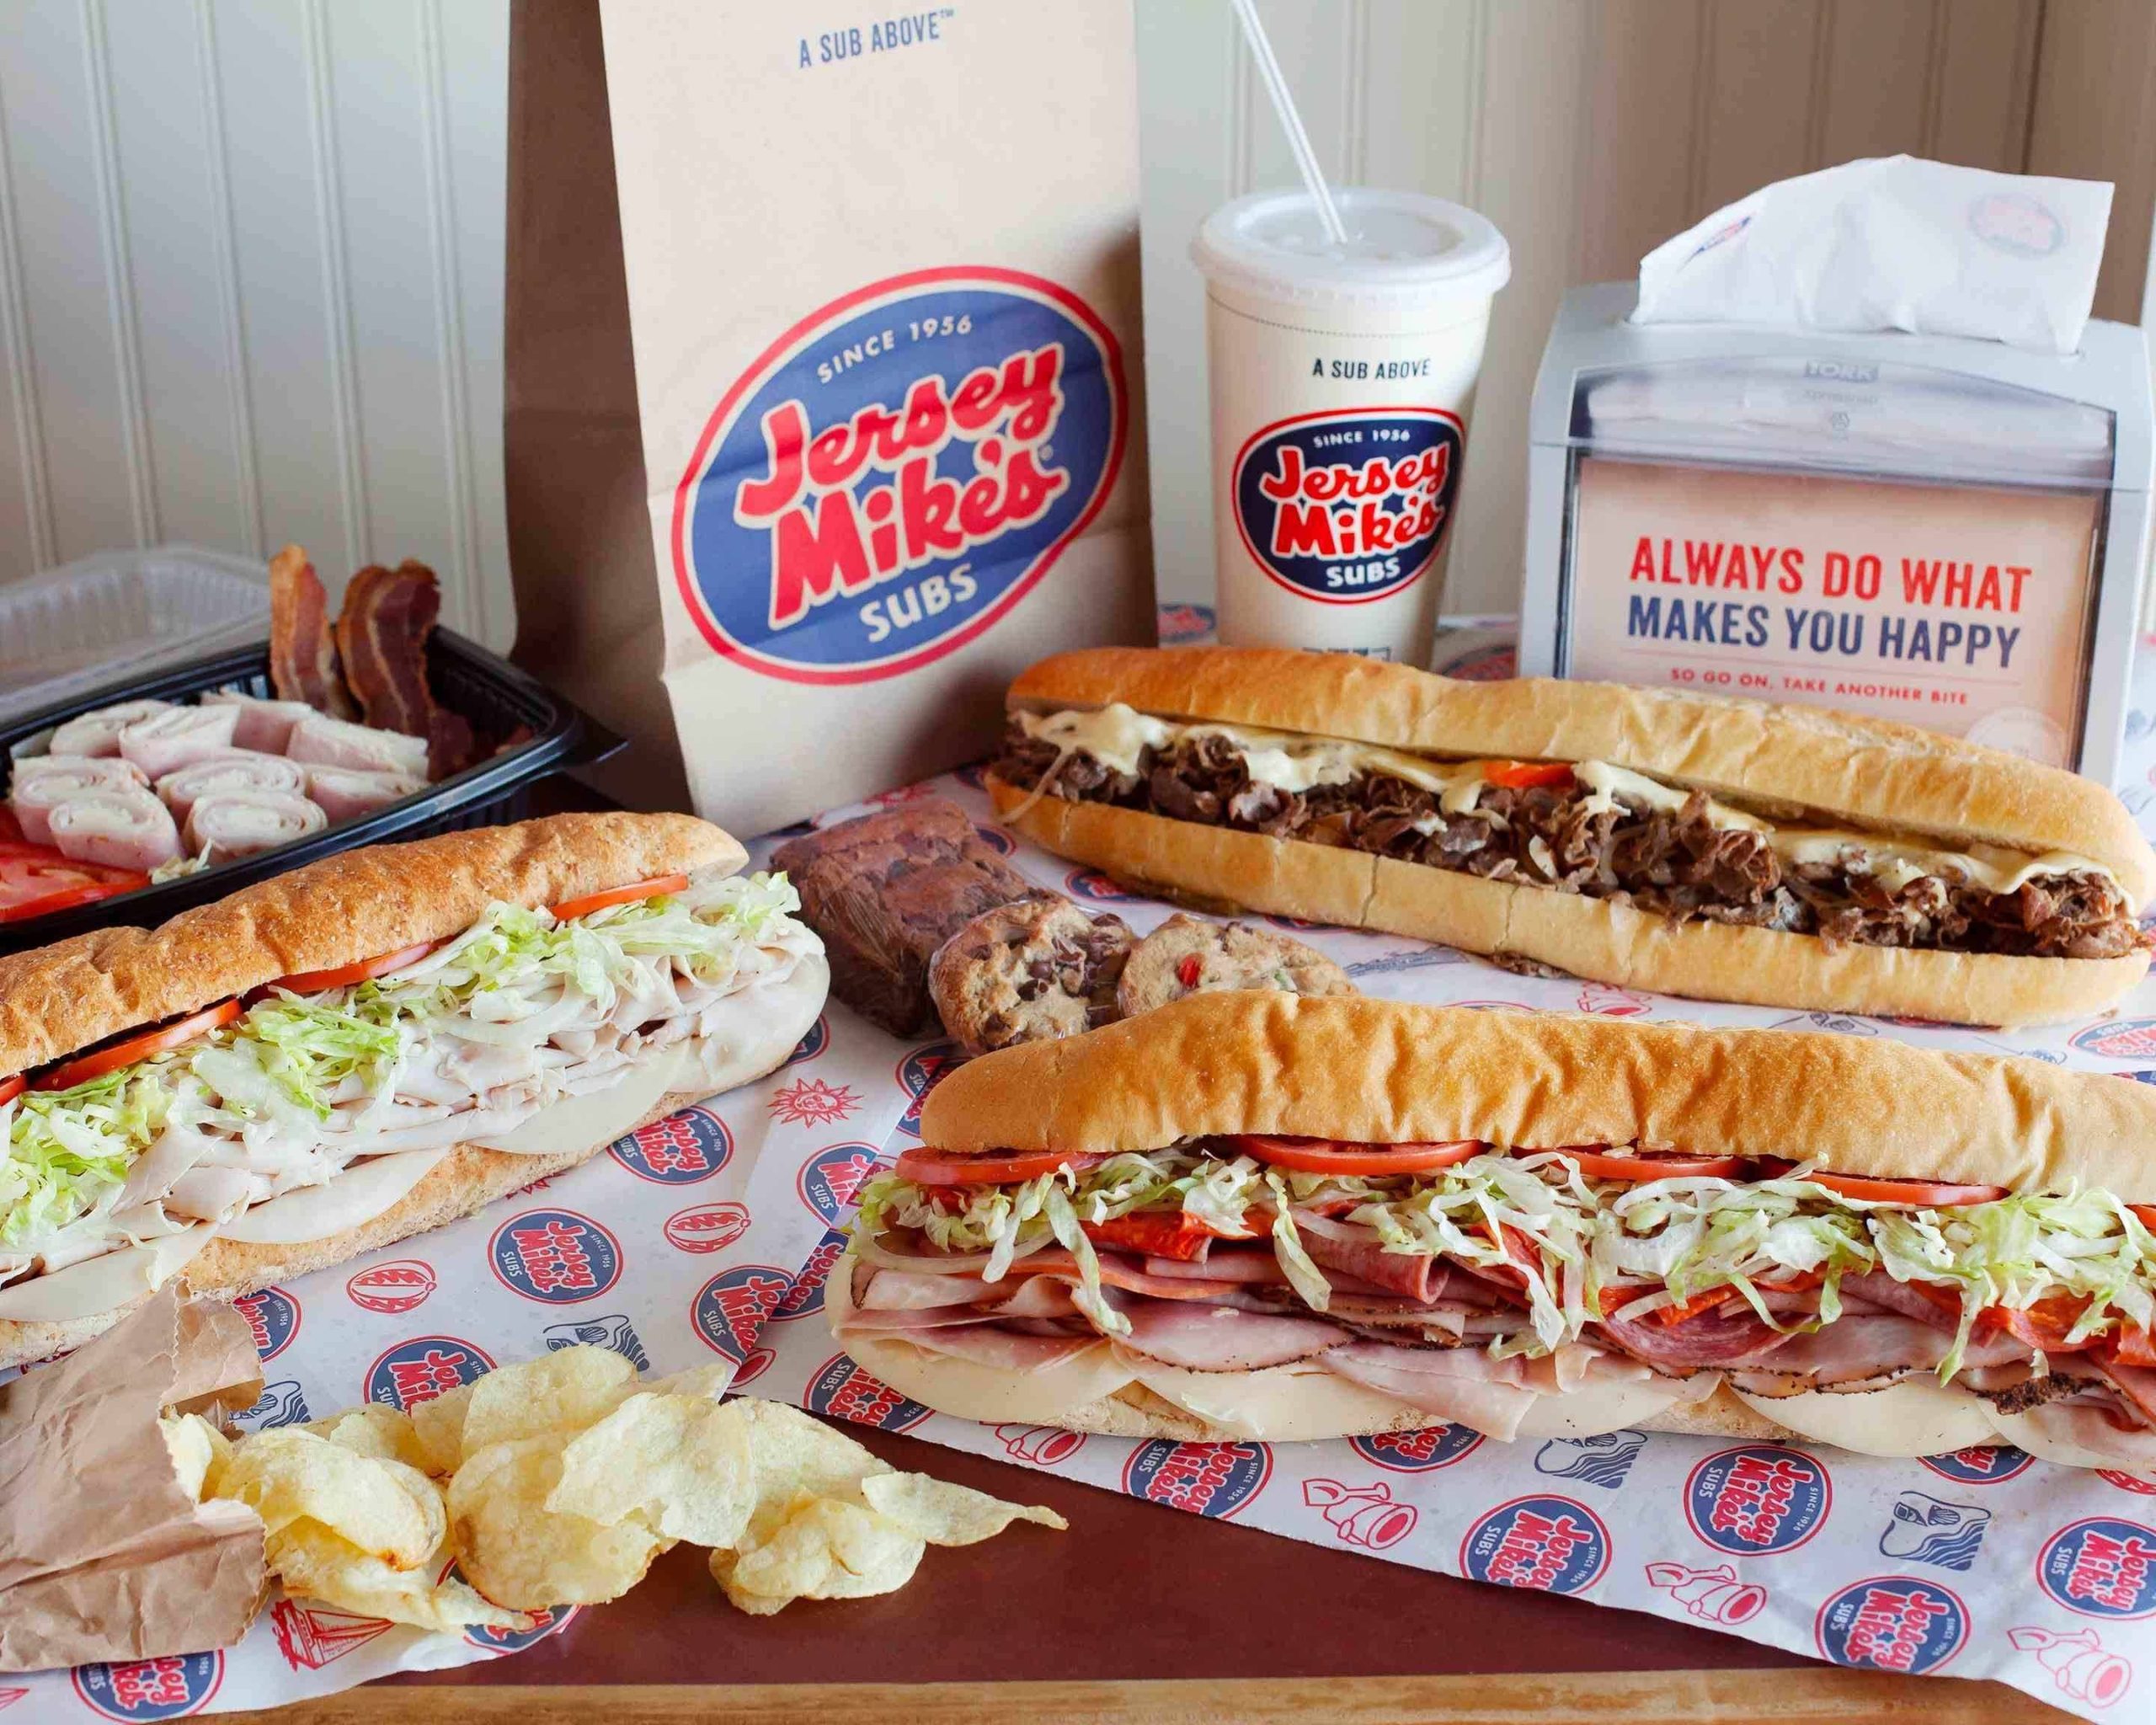 Jersey Mikes Subs